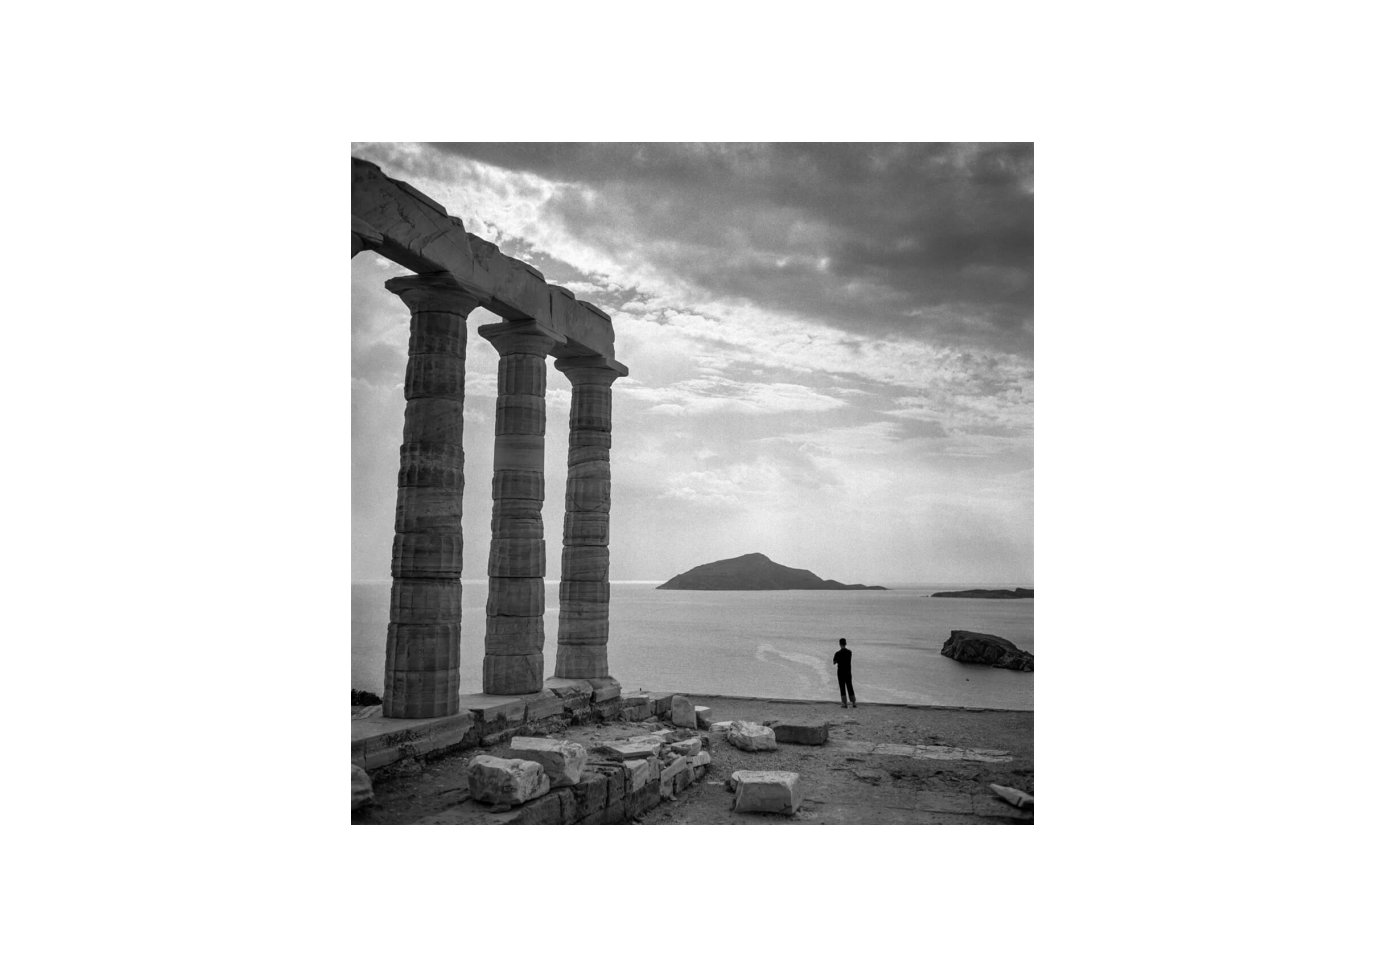 A man stand looking out to sea at the Temple of Poseidon at Sounion. Photo by Robert McCabe. 